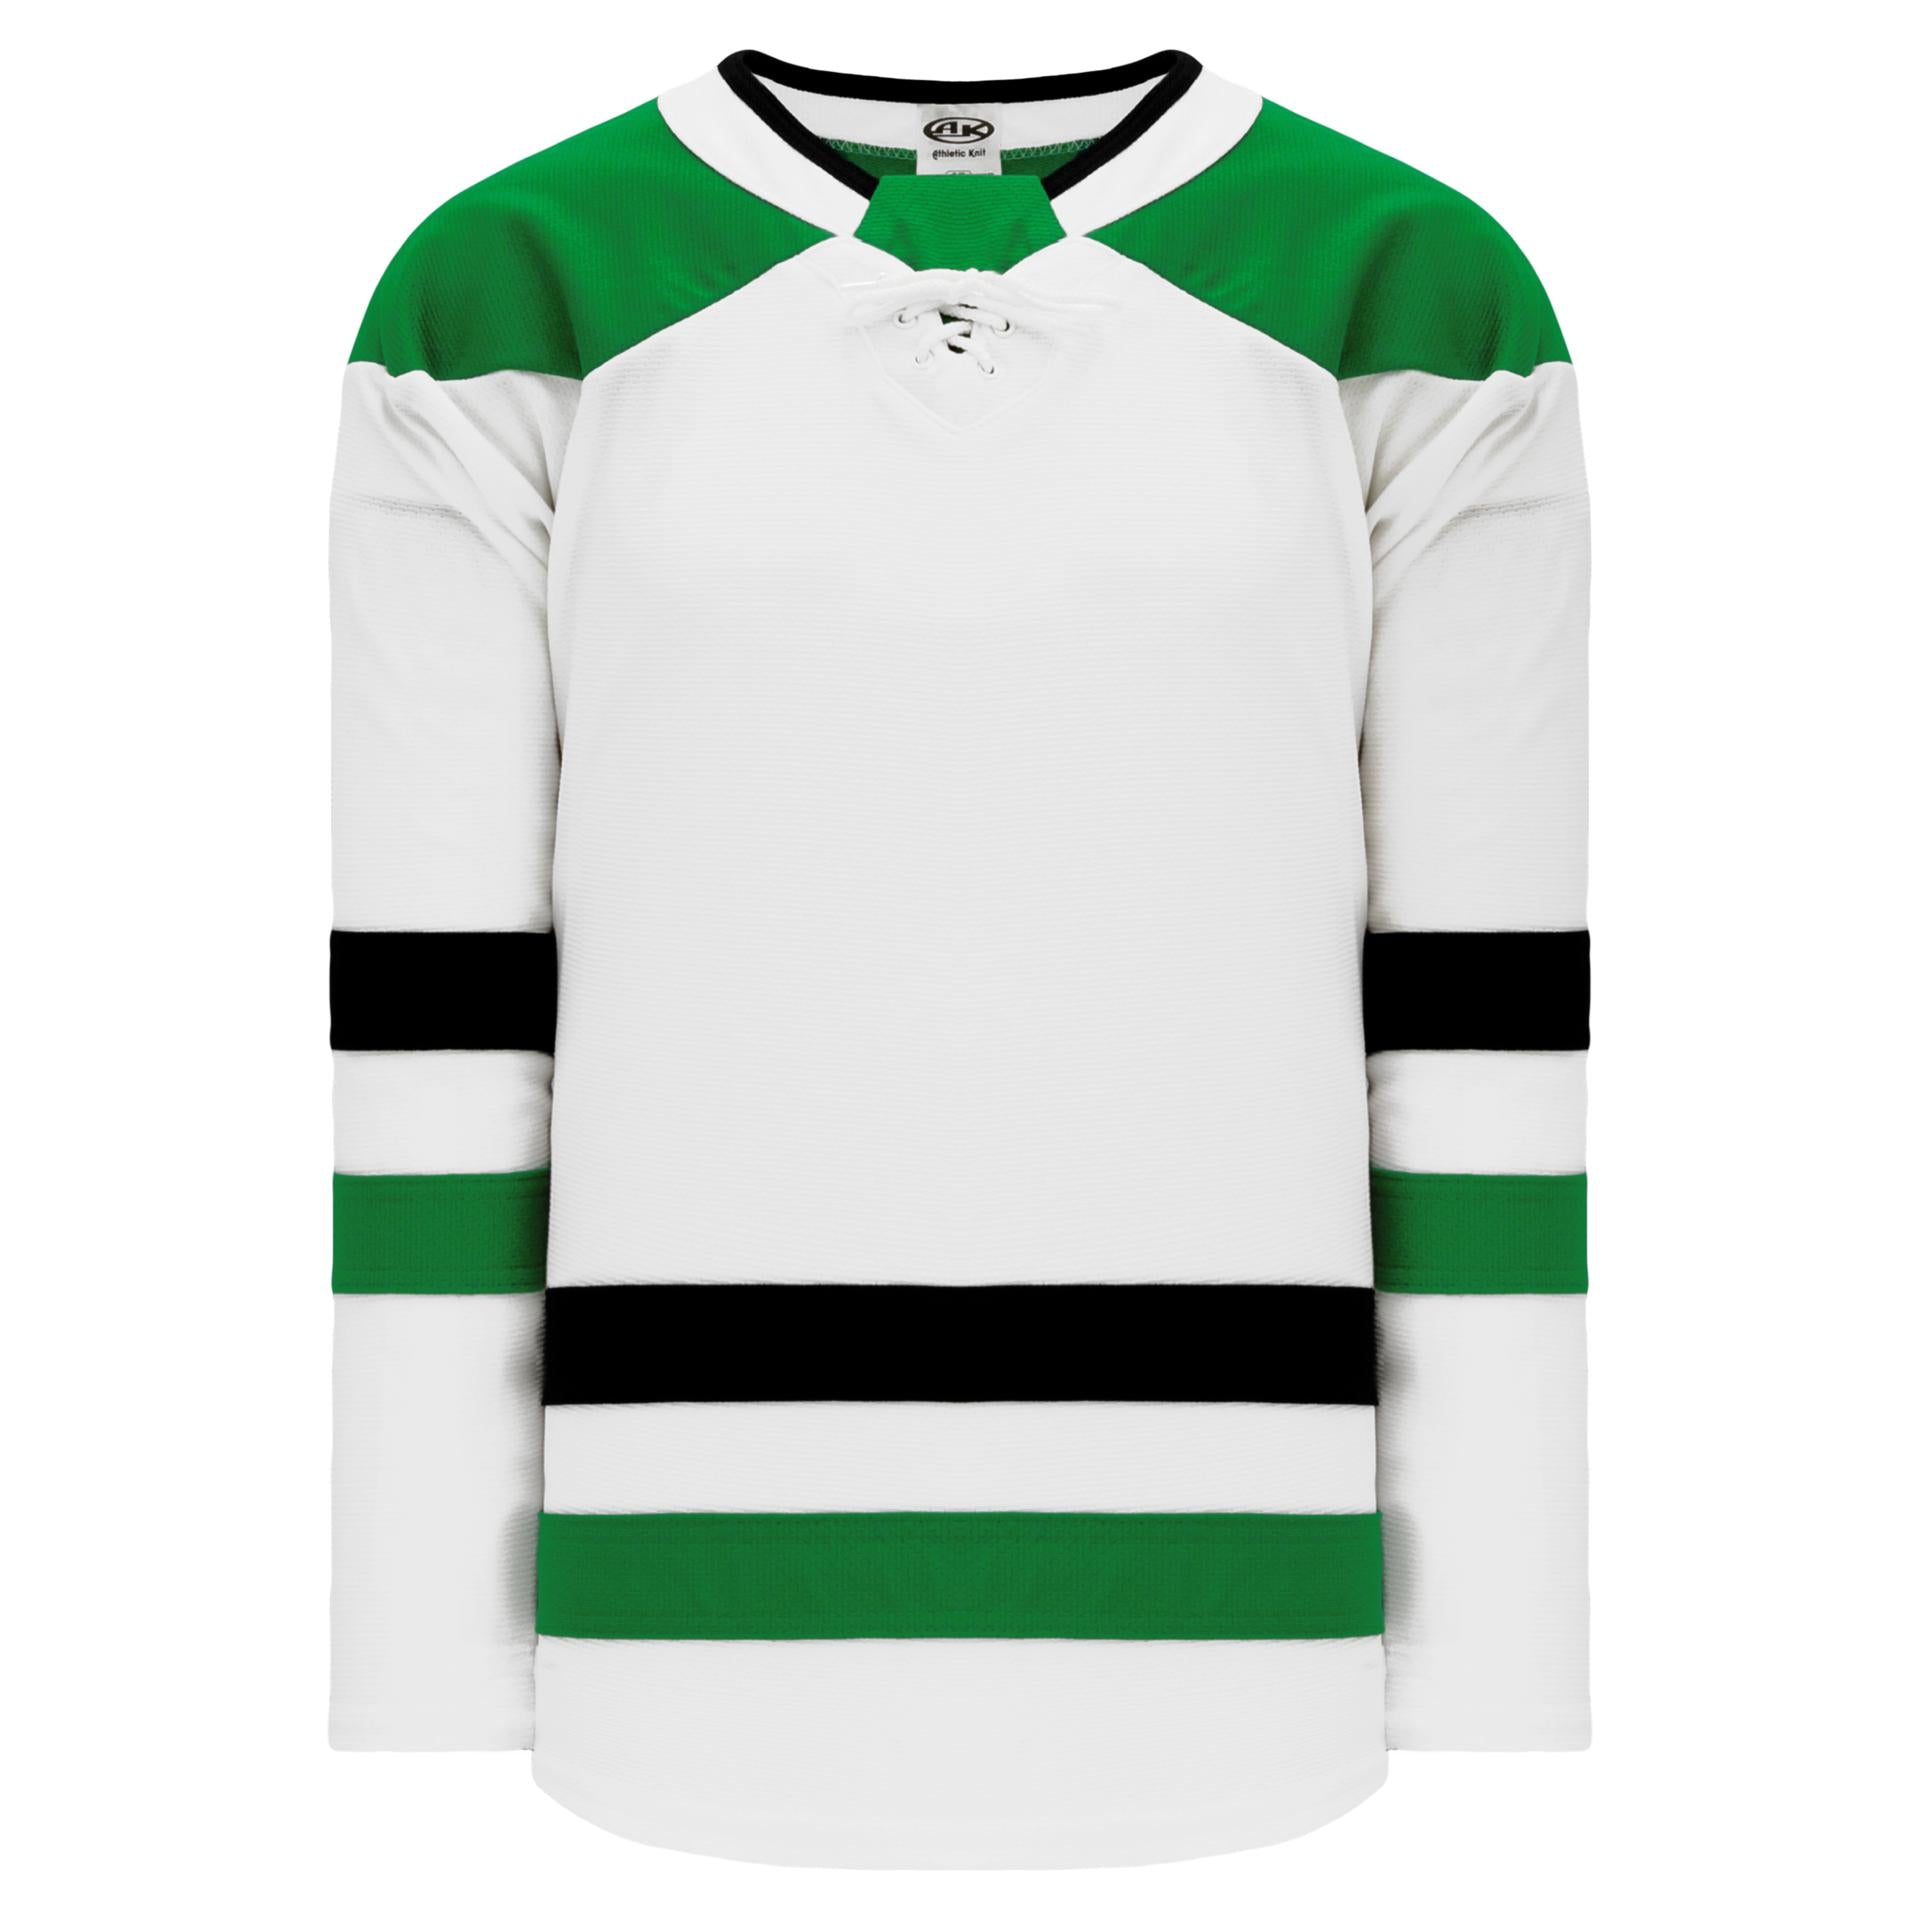 Stars jersey concept. Let me know your thoughts! : r/DallasStars